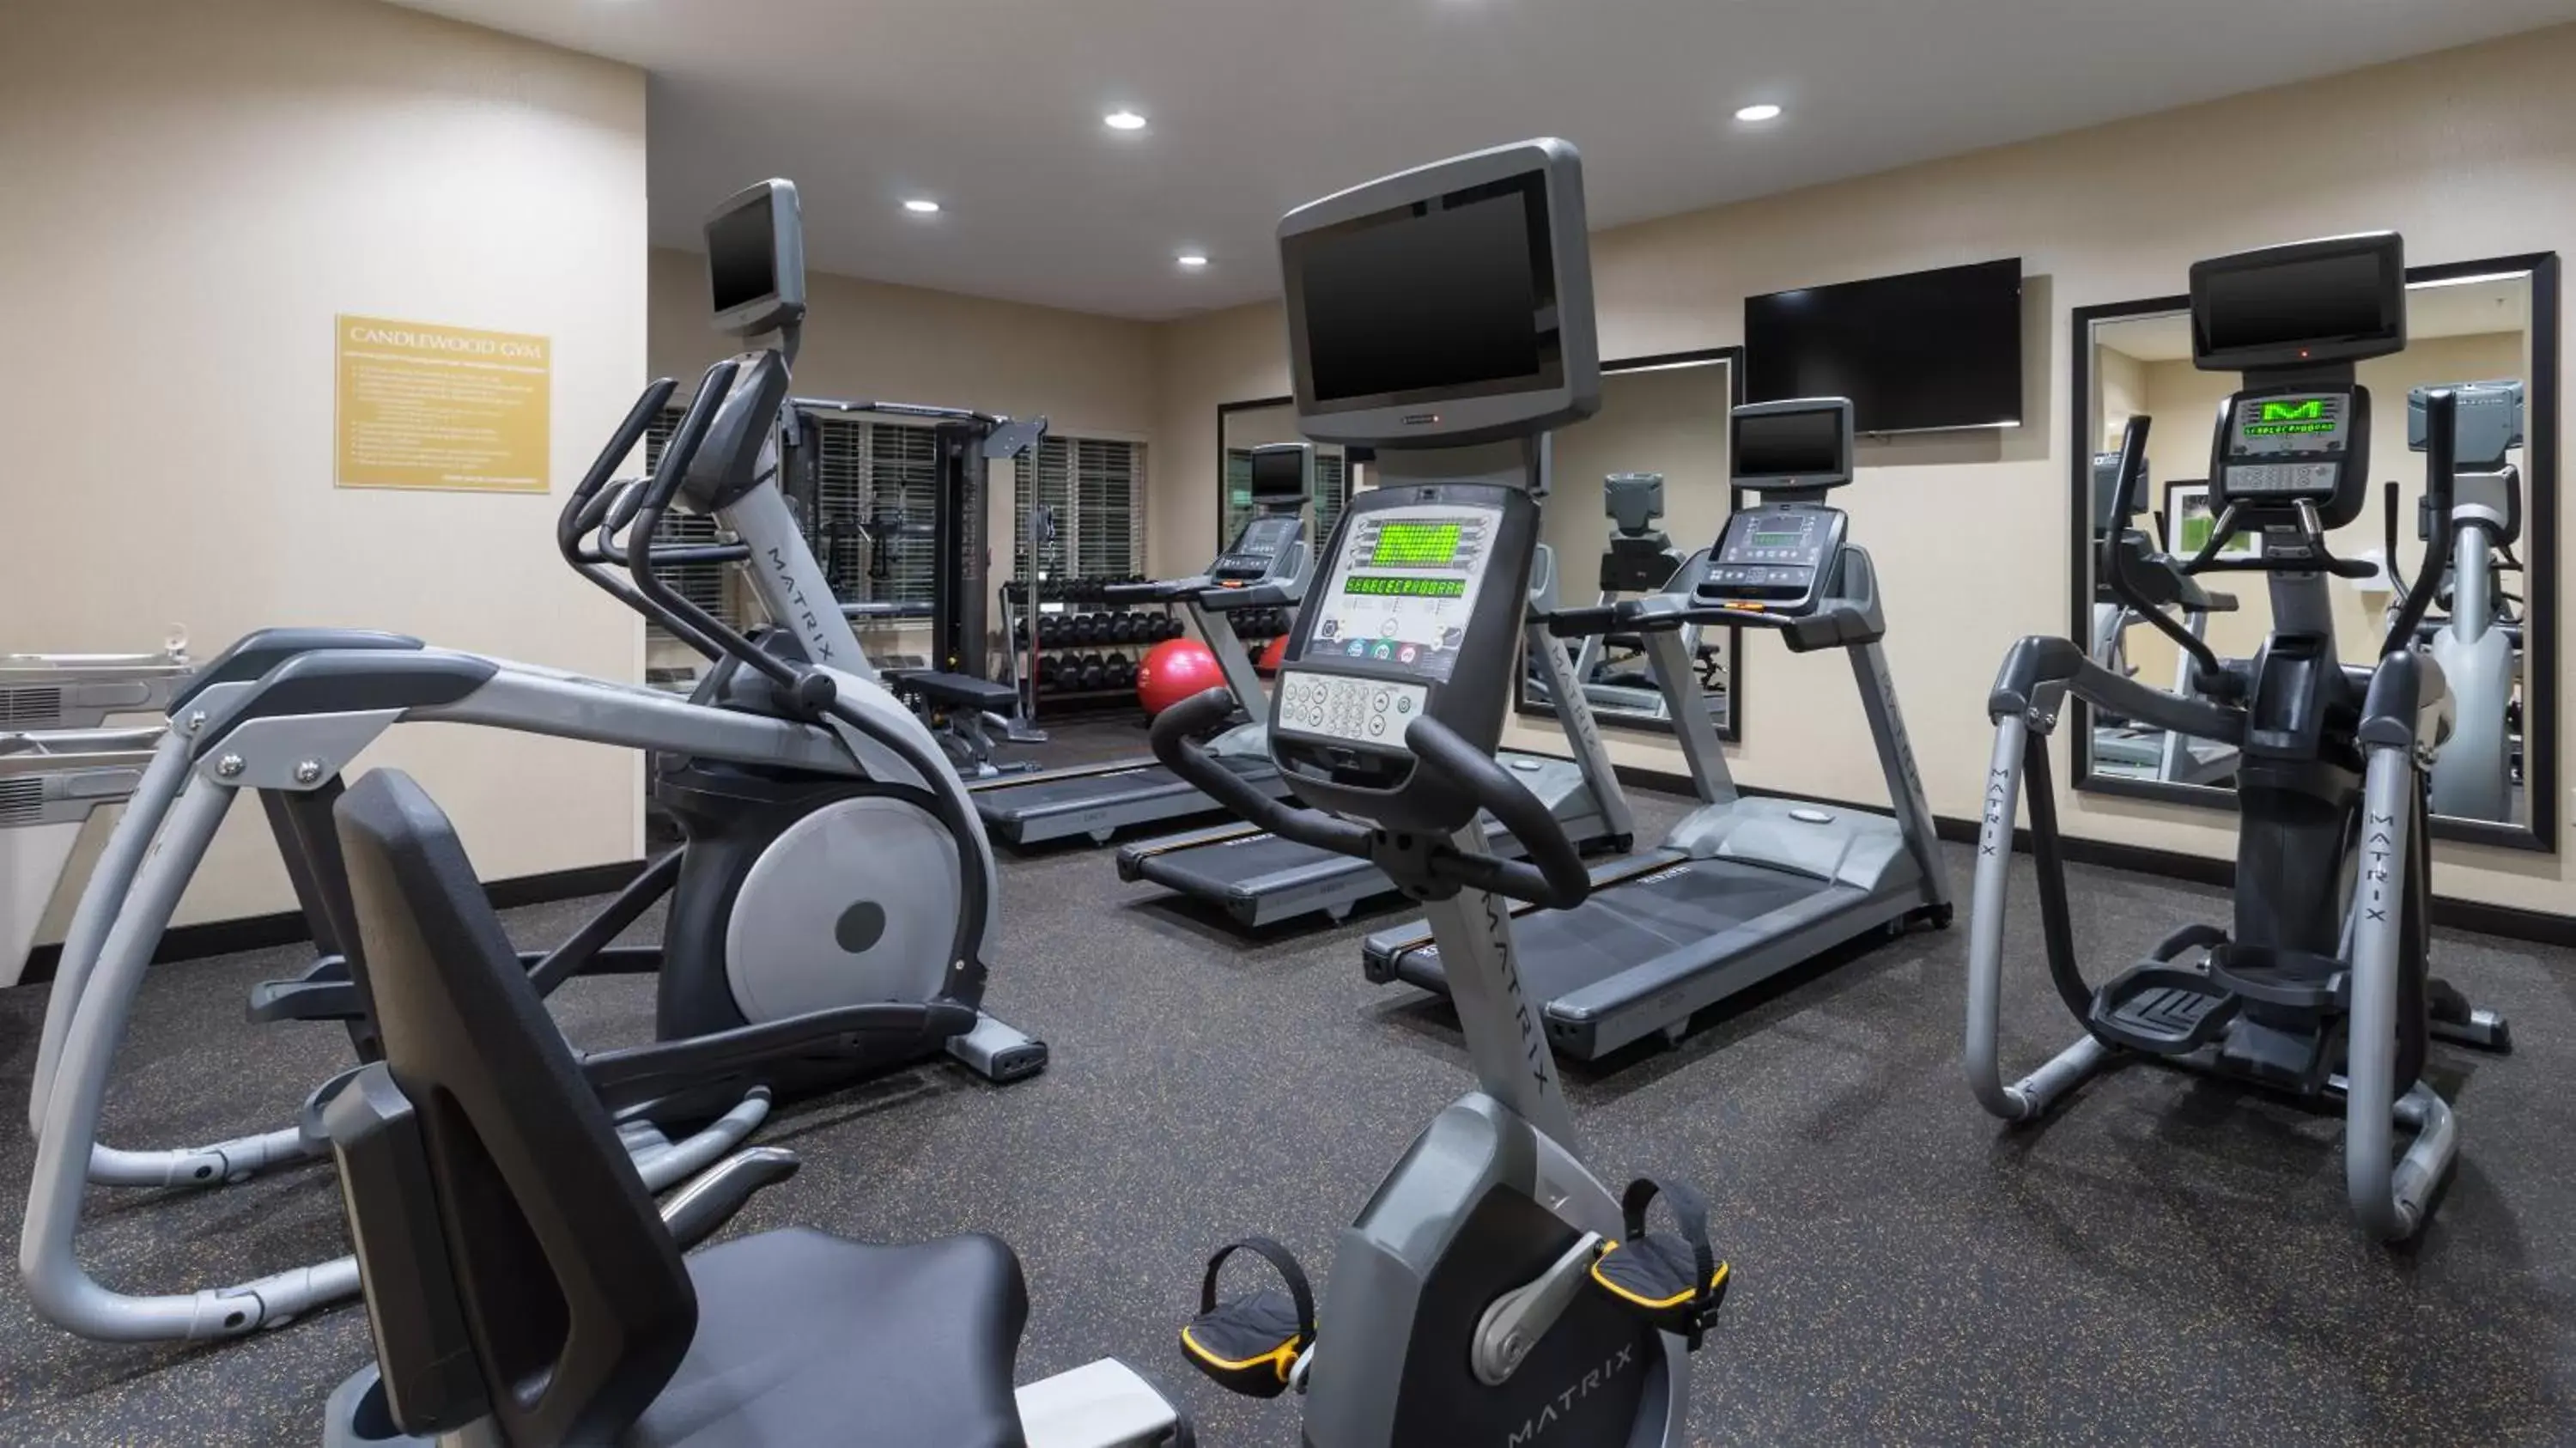 Fitness centre/facilities, Fitness Center/Facilities in Candlewood Suites Grove City - Outlet Center, an IHG Hotel